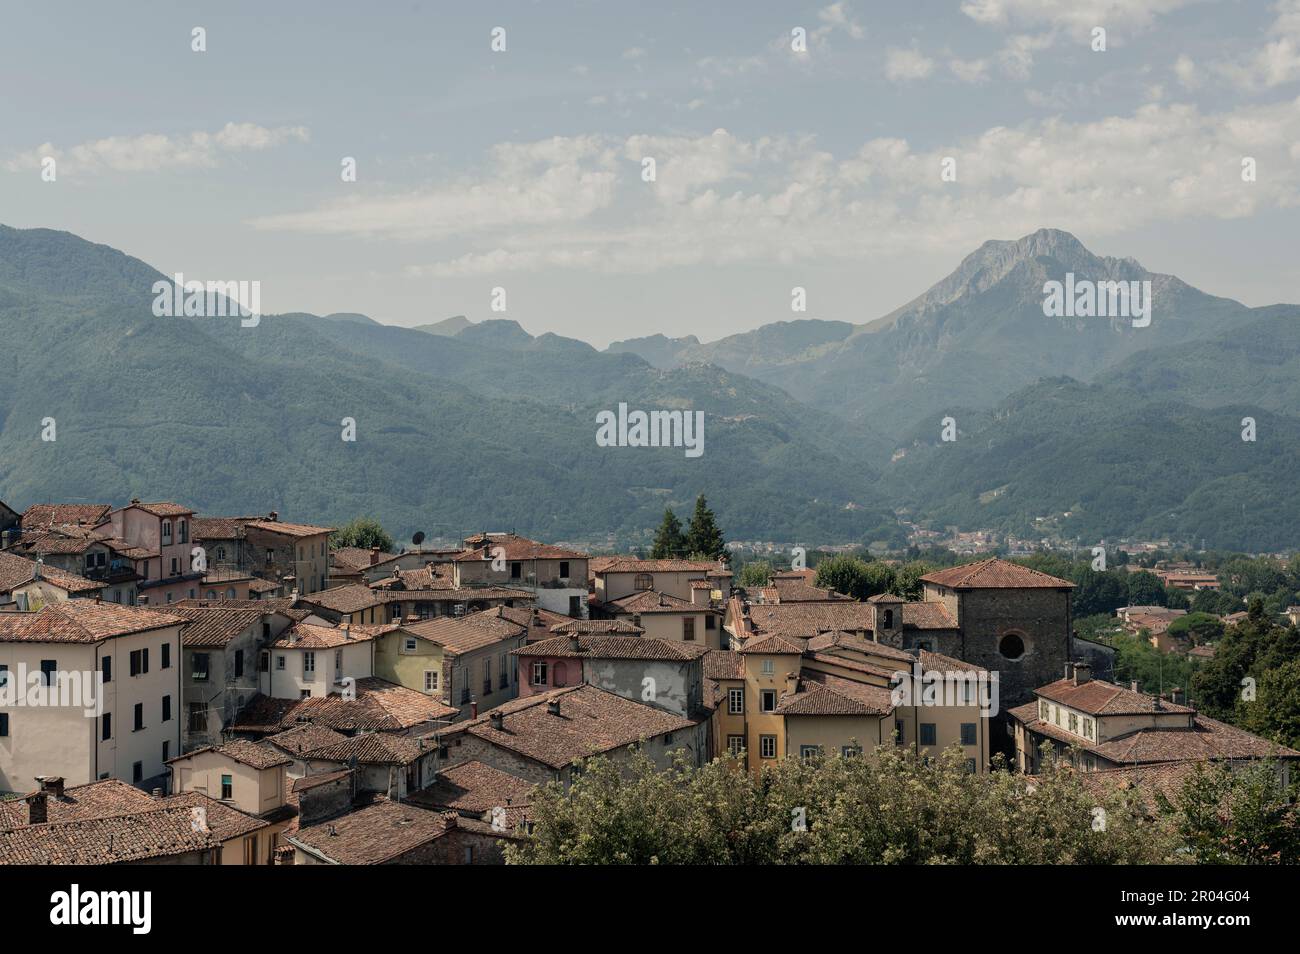 Castelnuovo di Garfagnana, Lucca, Tuscany (Italy). Panorama of the mountains and medieval villages Stock Photo